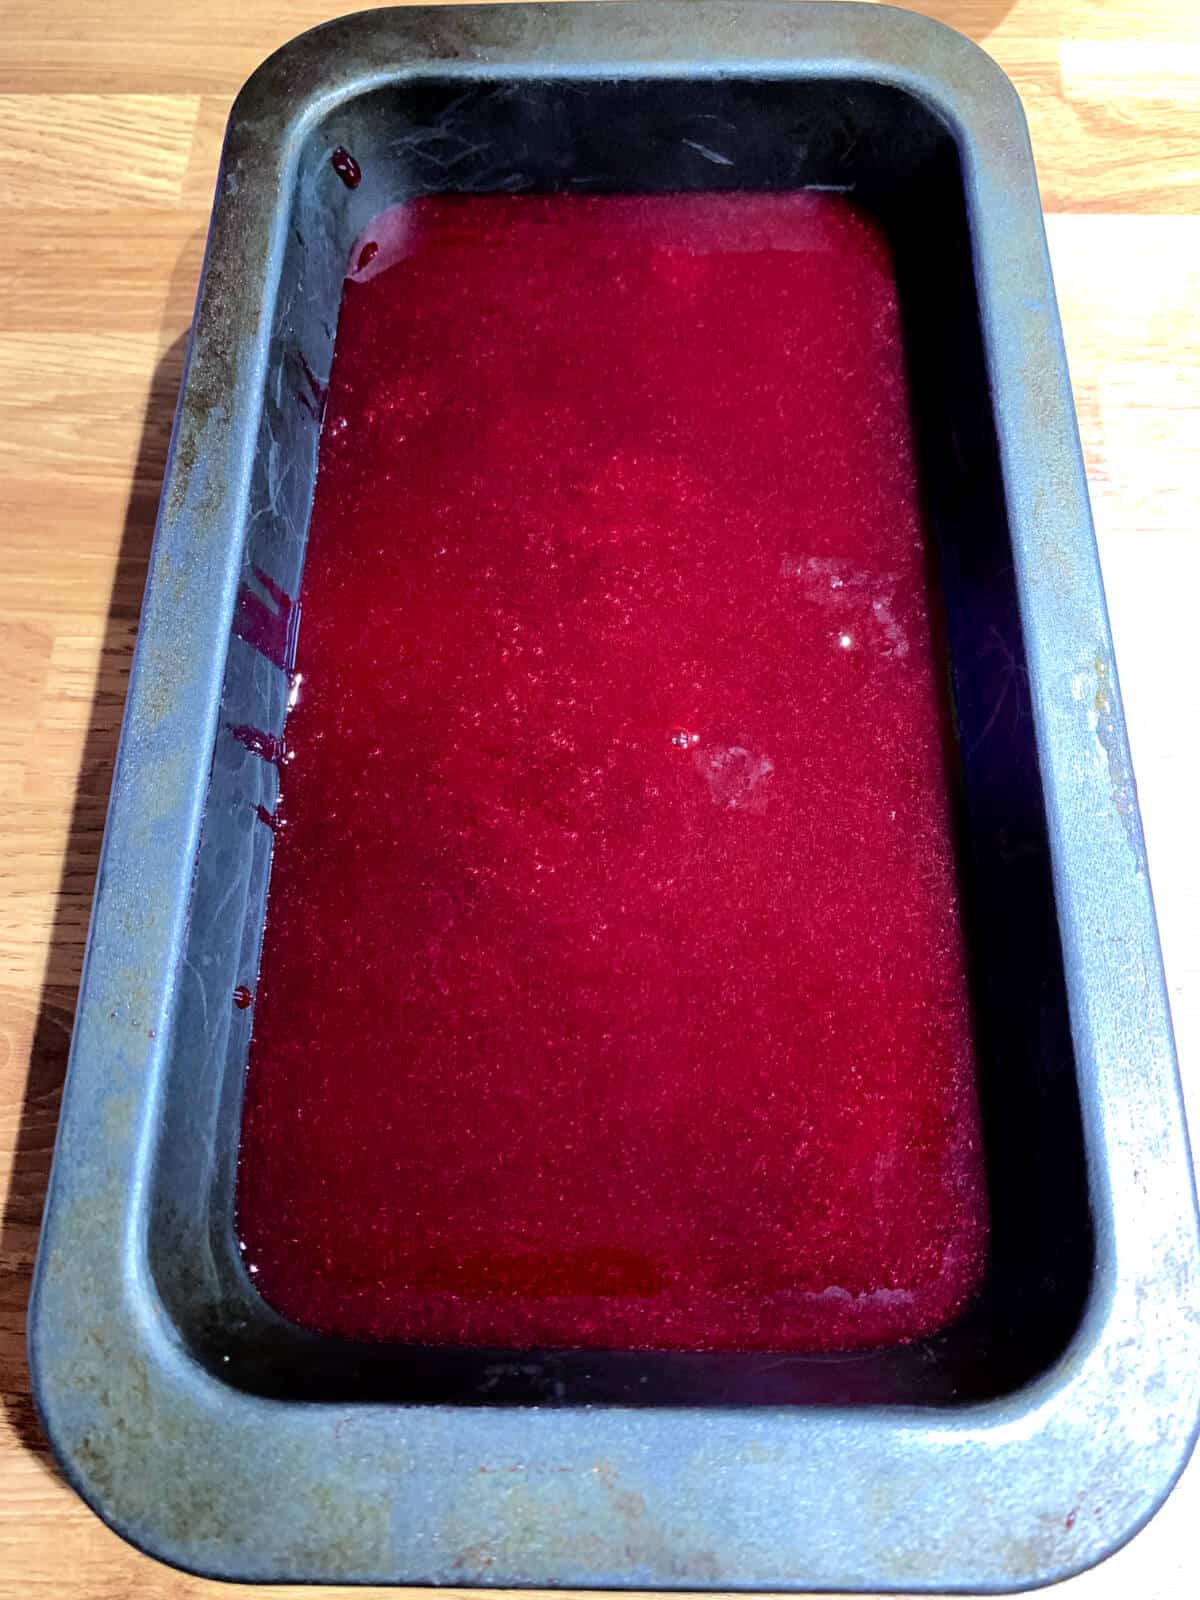 Blackcurrant sorbet in metal tin, after churning but before freezing in freezer.